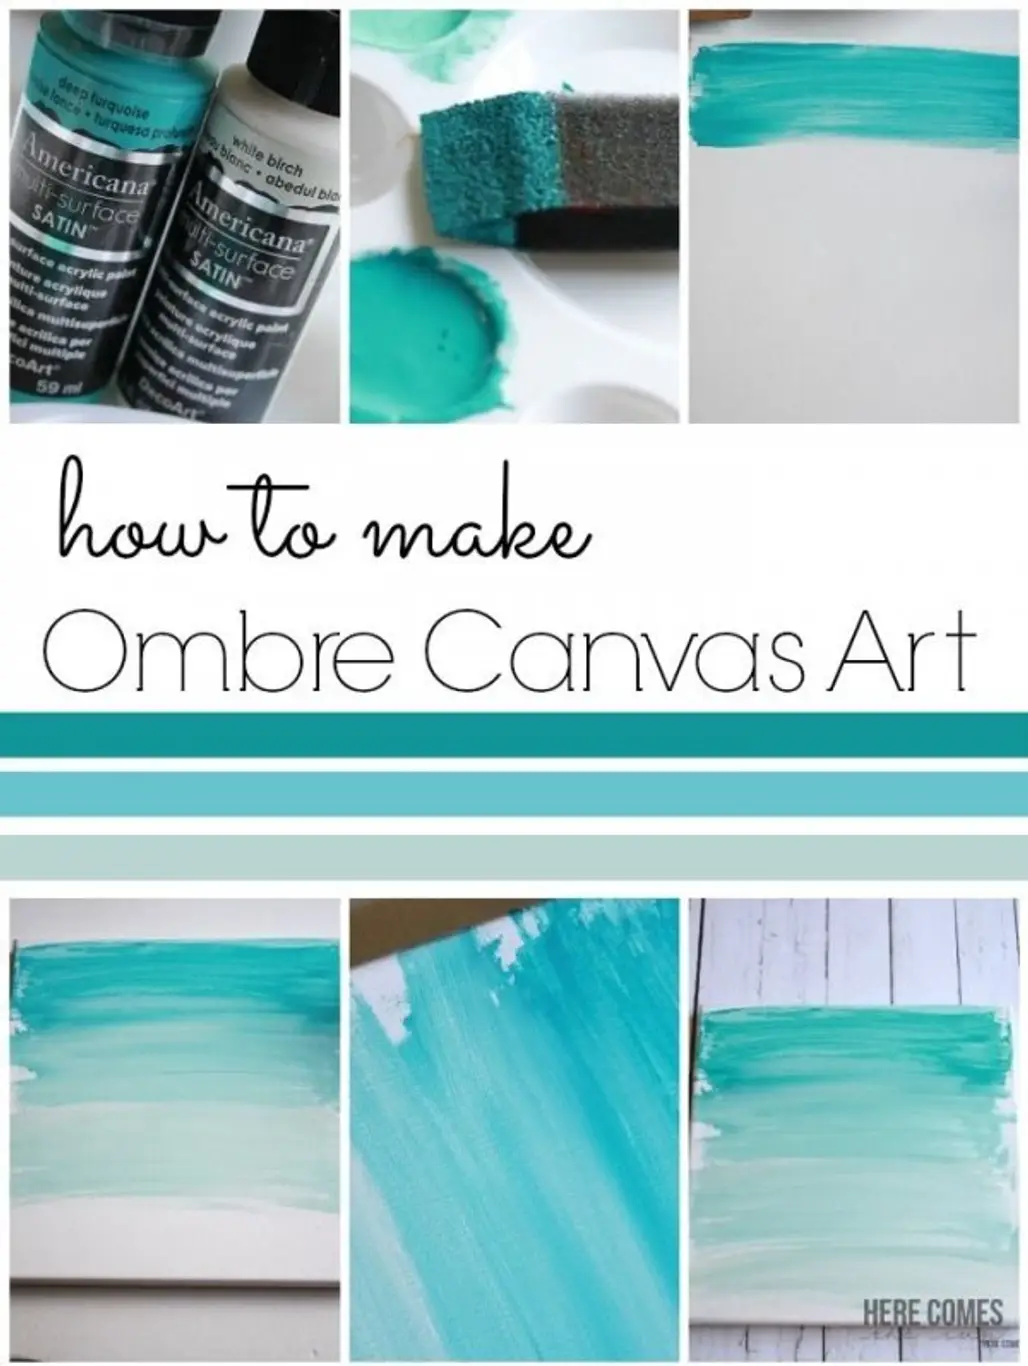 How to Make Ombré Canvas Art!